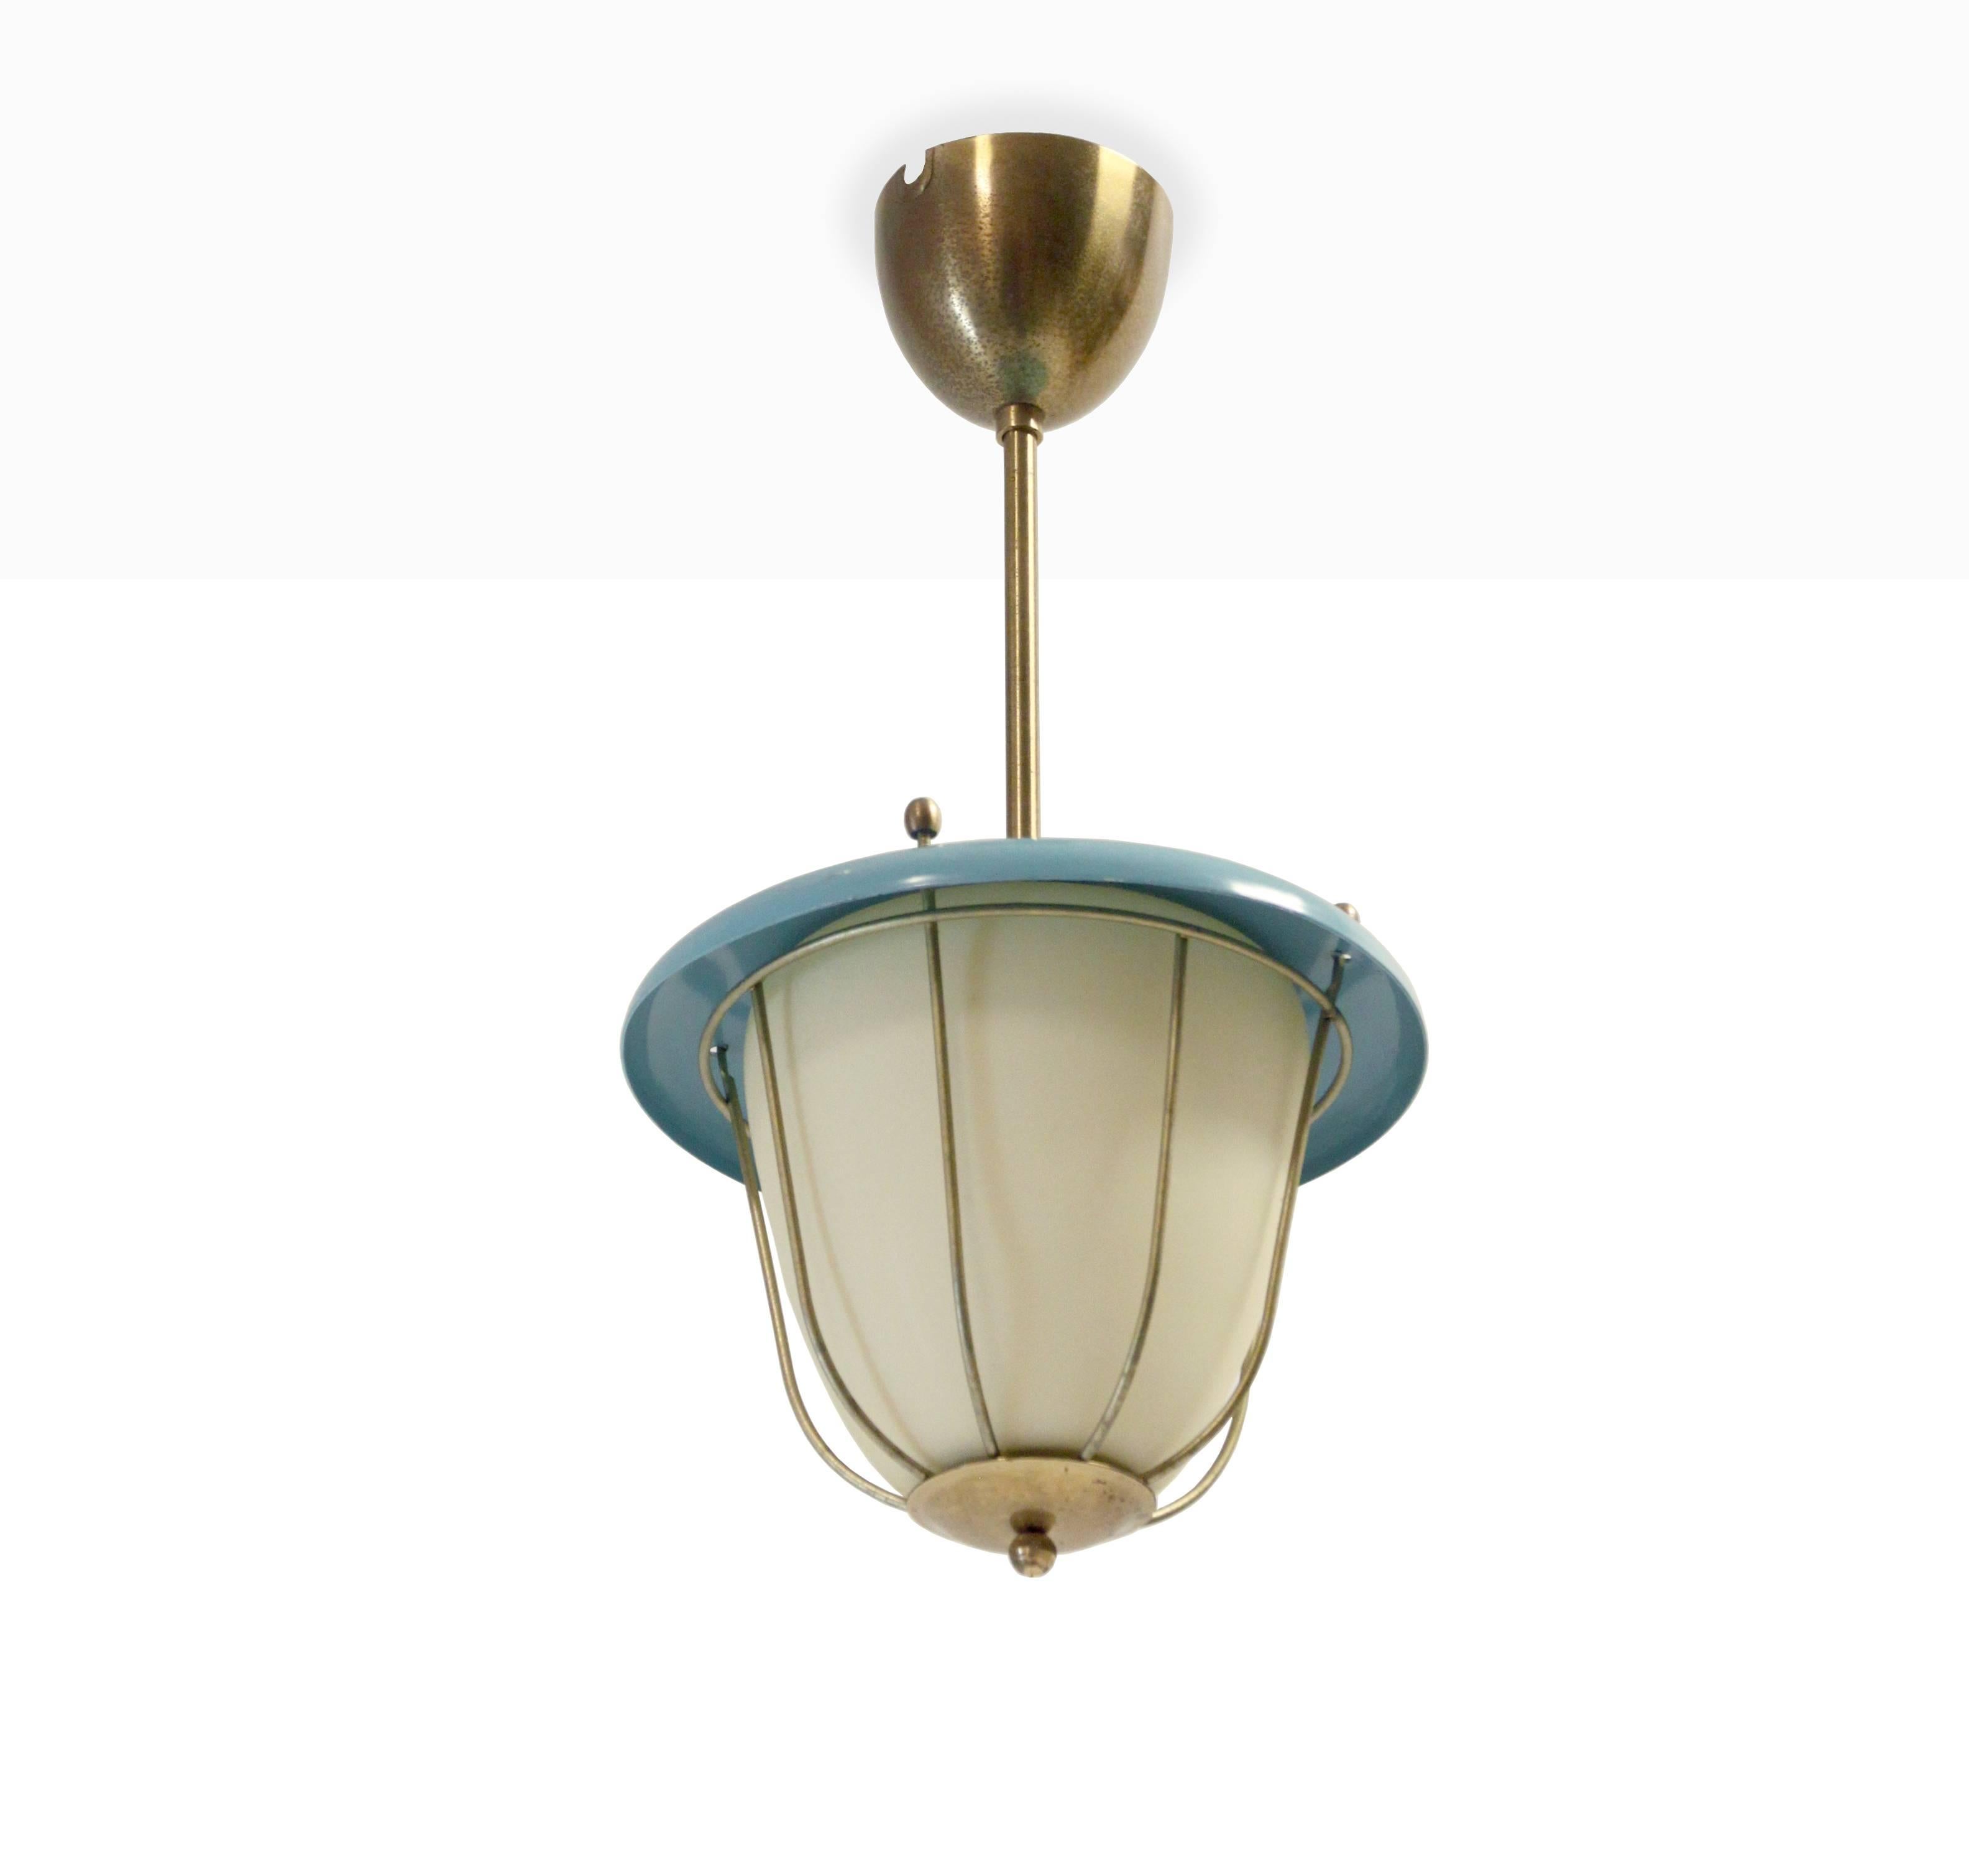 Wonderful ceiling light in a brass frame, steel and shade in opaline glass.

Most likely designed and made in Norway from circa 1950s second half.

The lamp is fully working and in excellent vintage condition.